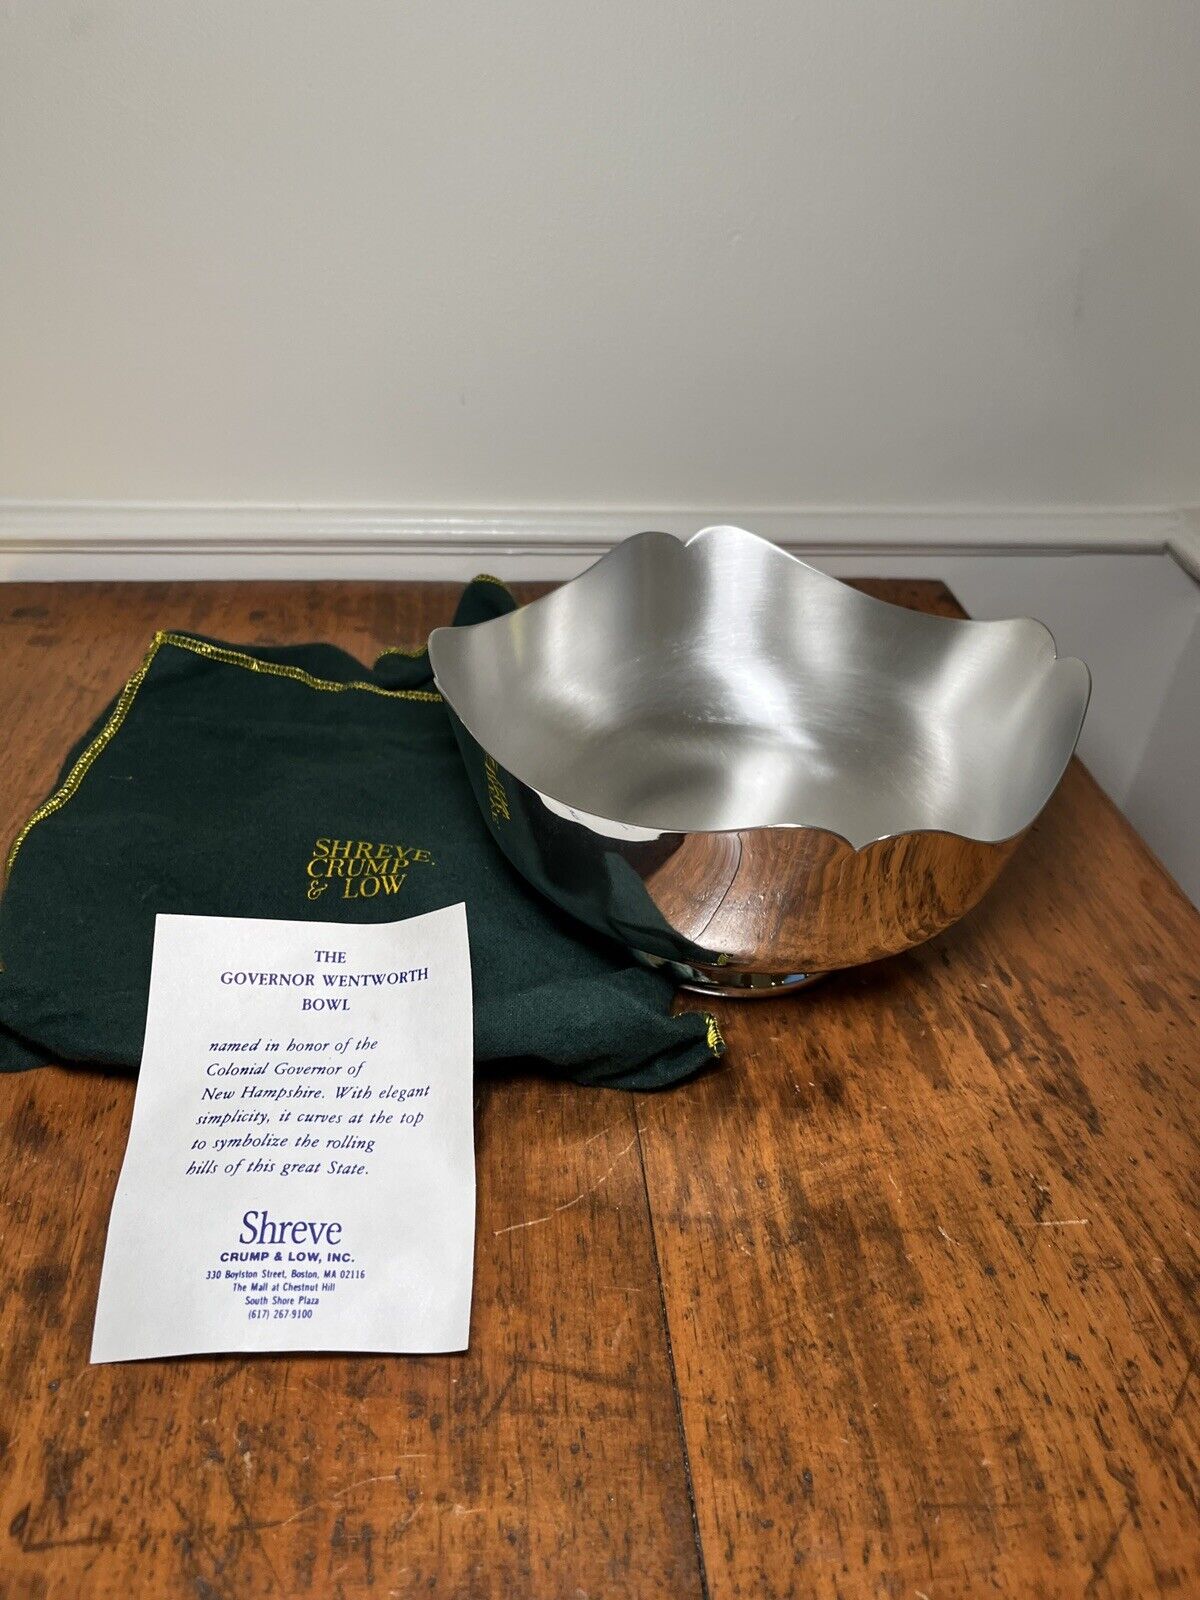 Vintage Pewter Footed Governor Wentworth Bowl by Shreve Crump & Low, NEW